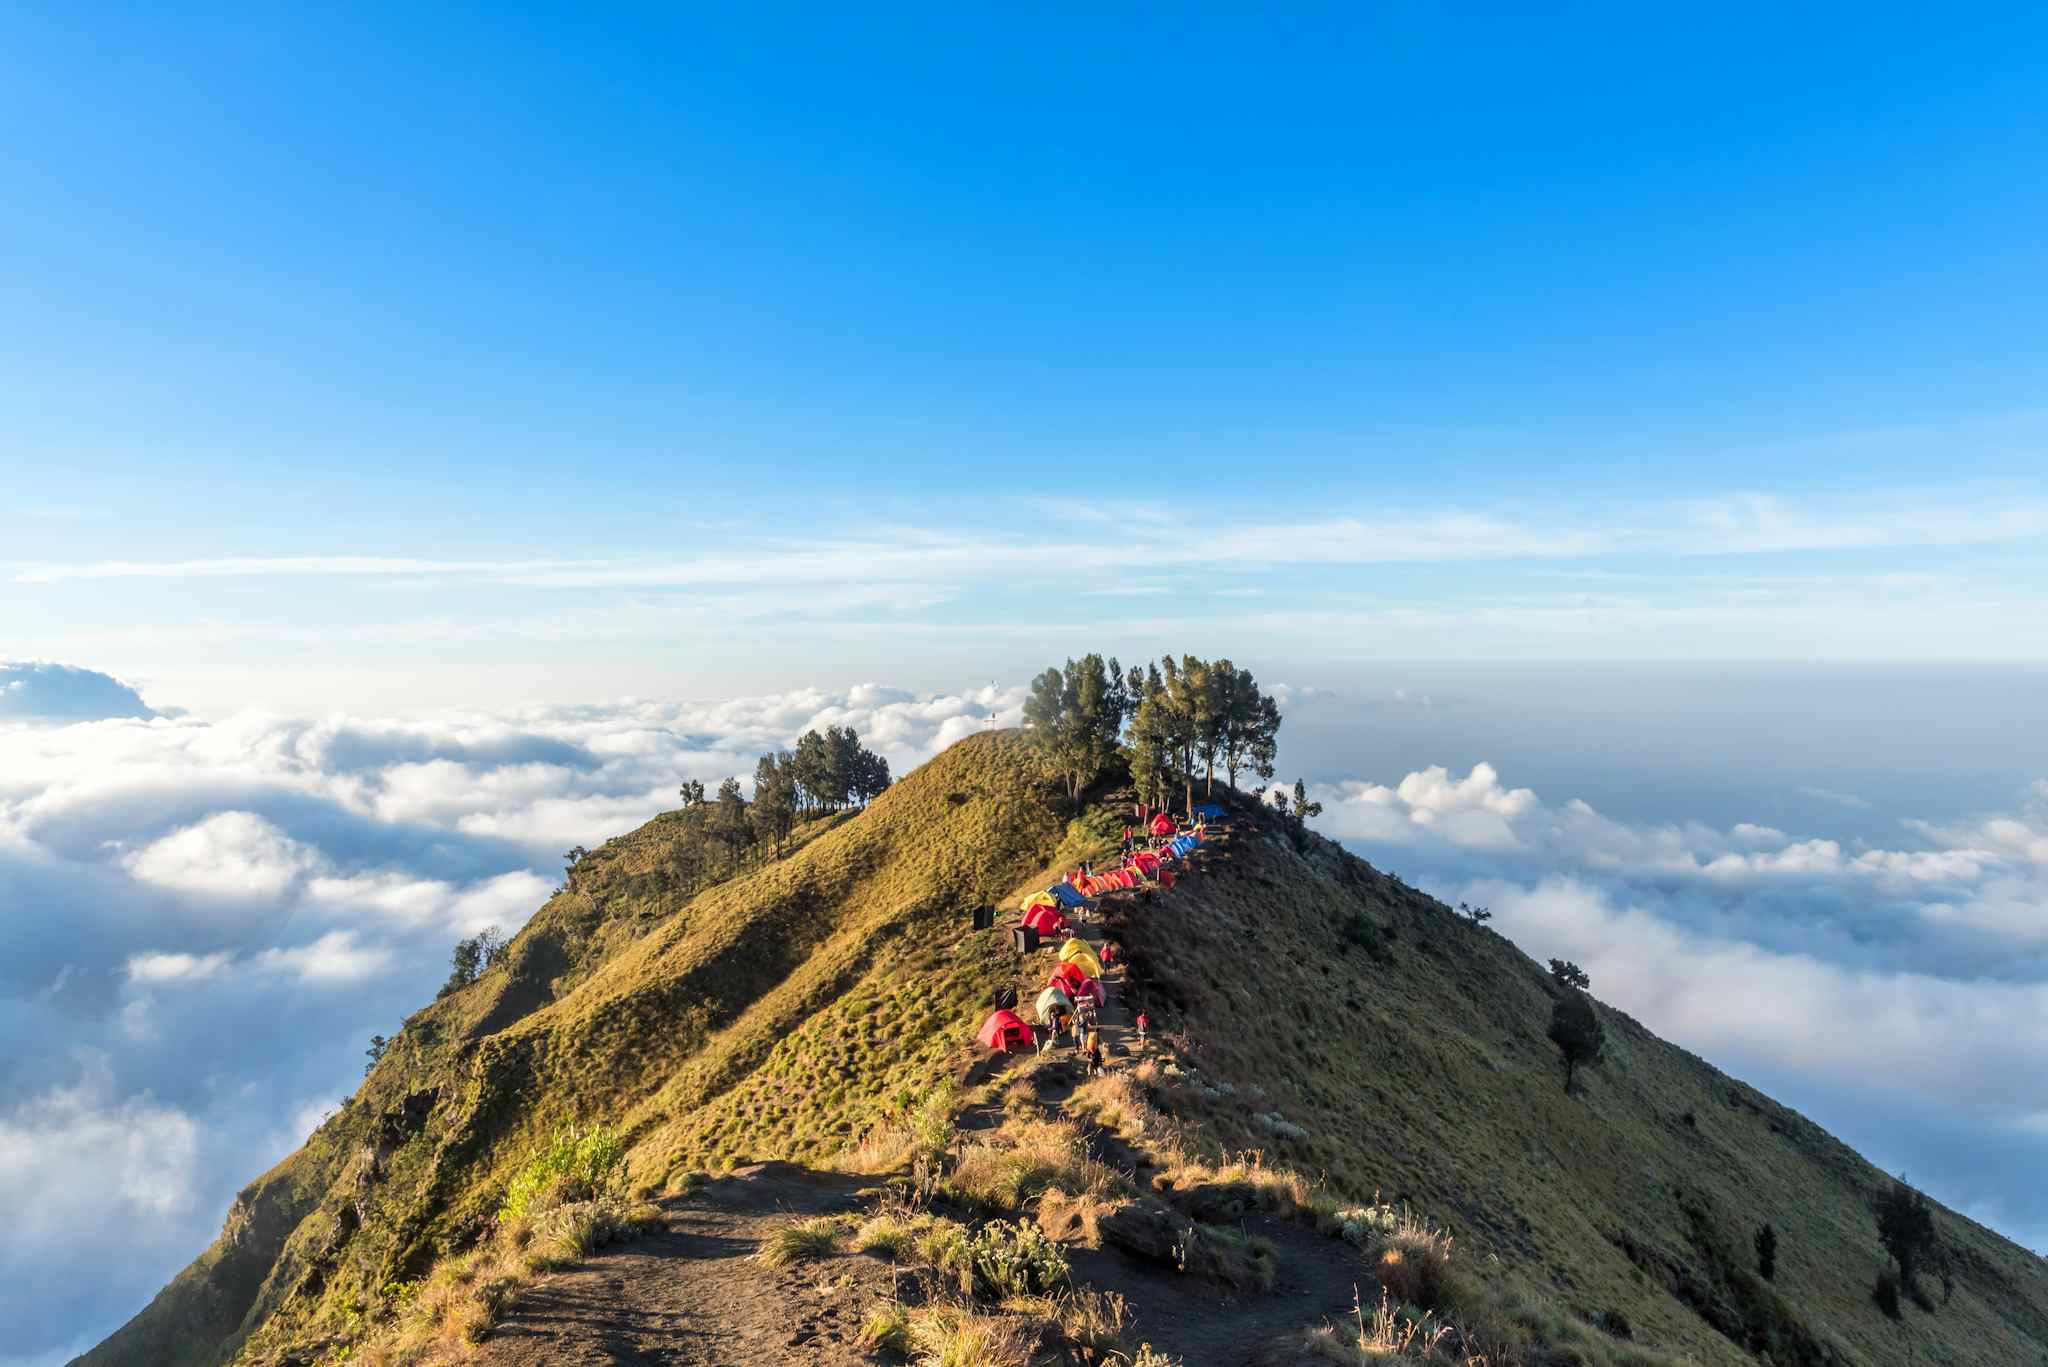 Group of trekkers camping on a ridge at Mount Rinjani volcano, Indonesia. Photo: Getty-874887810